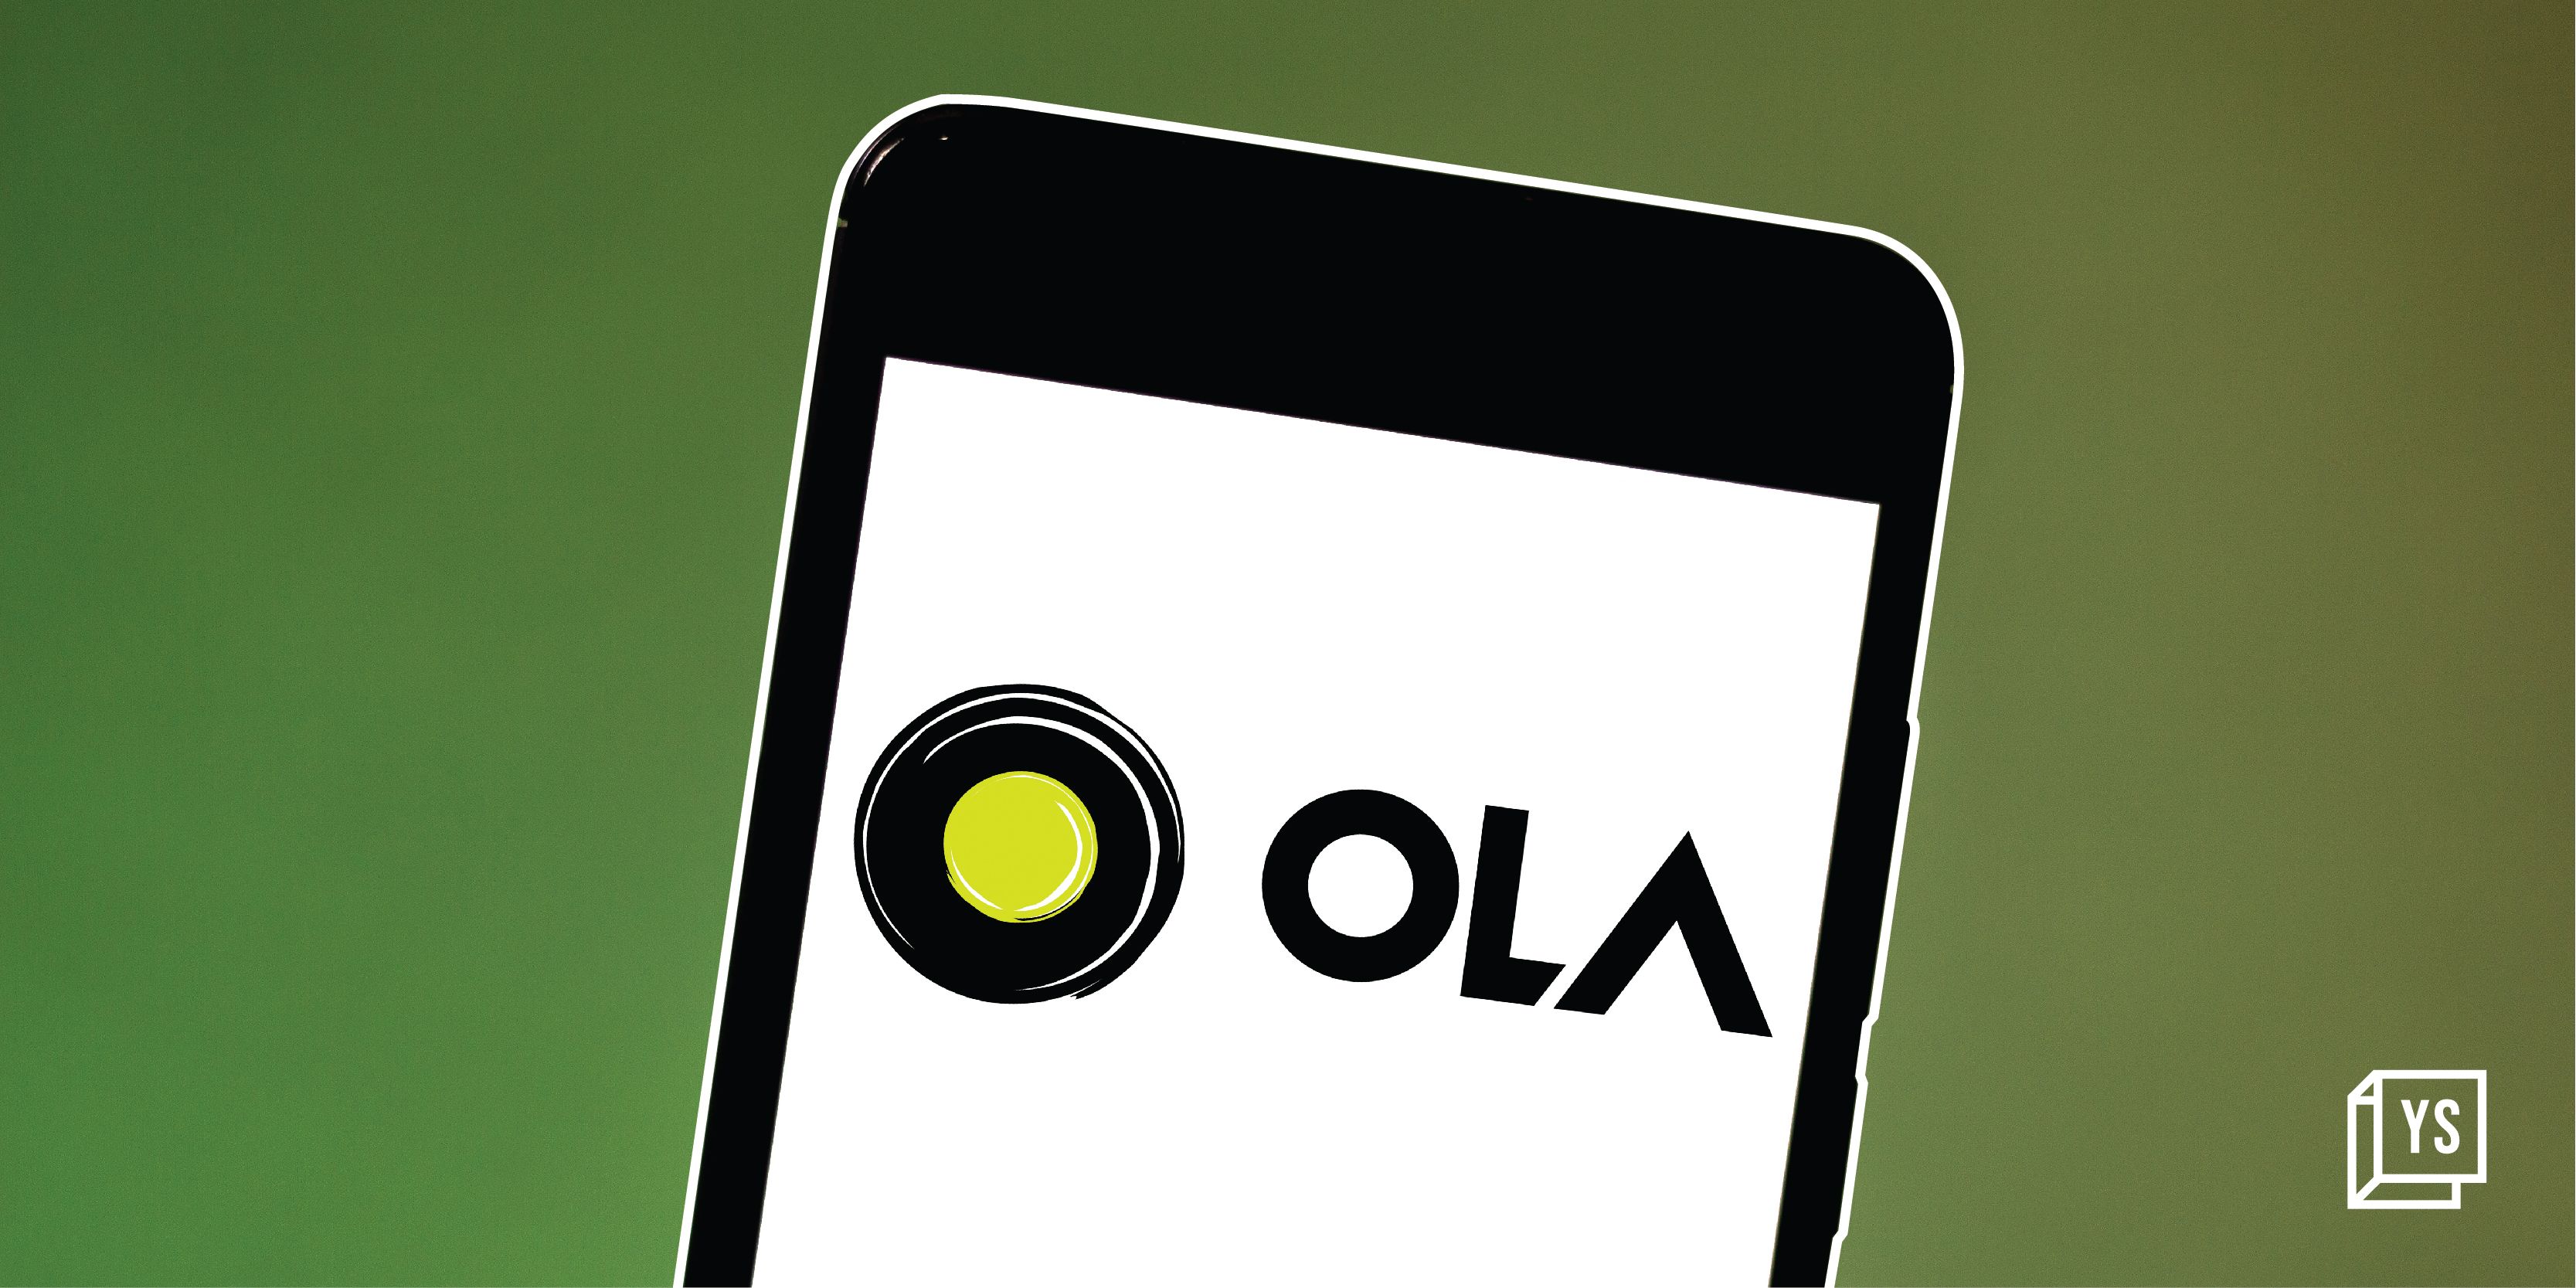 Ola to now enable UPI transactions within app